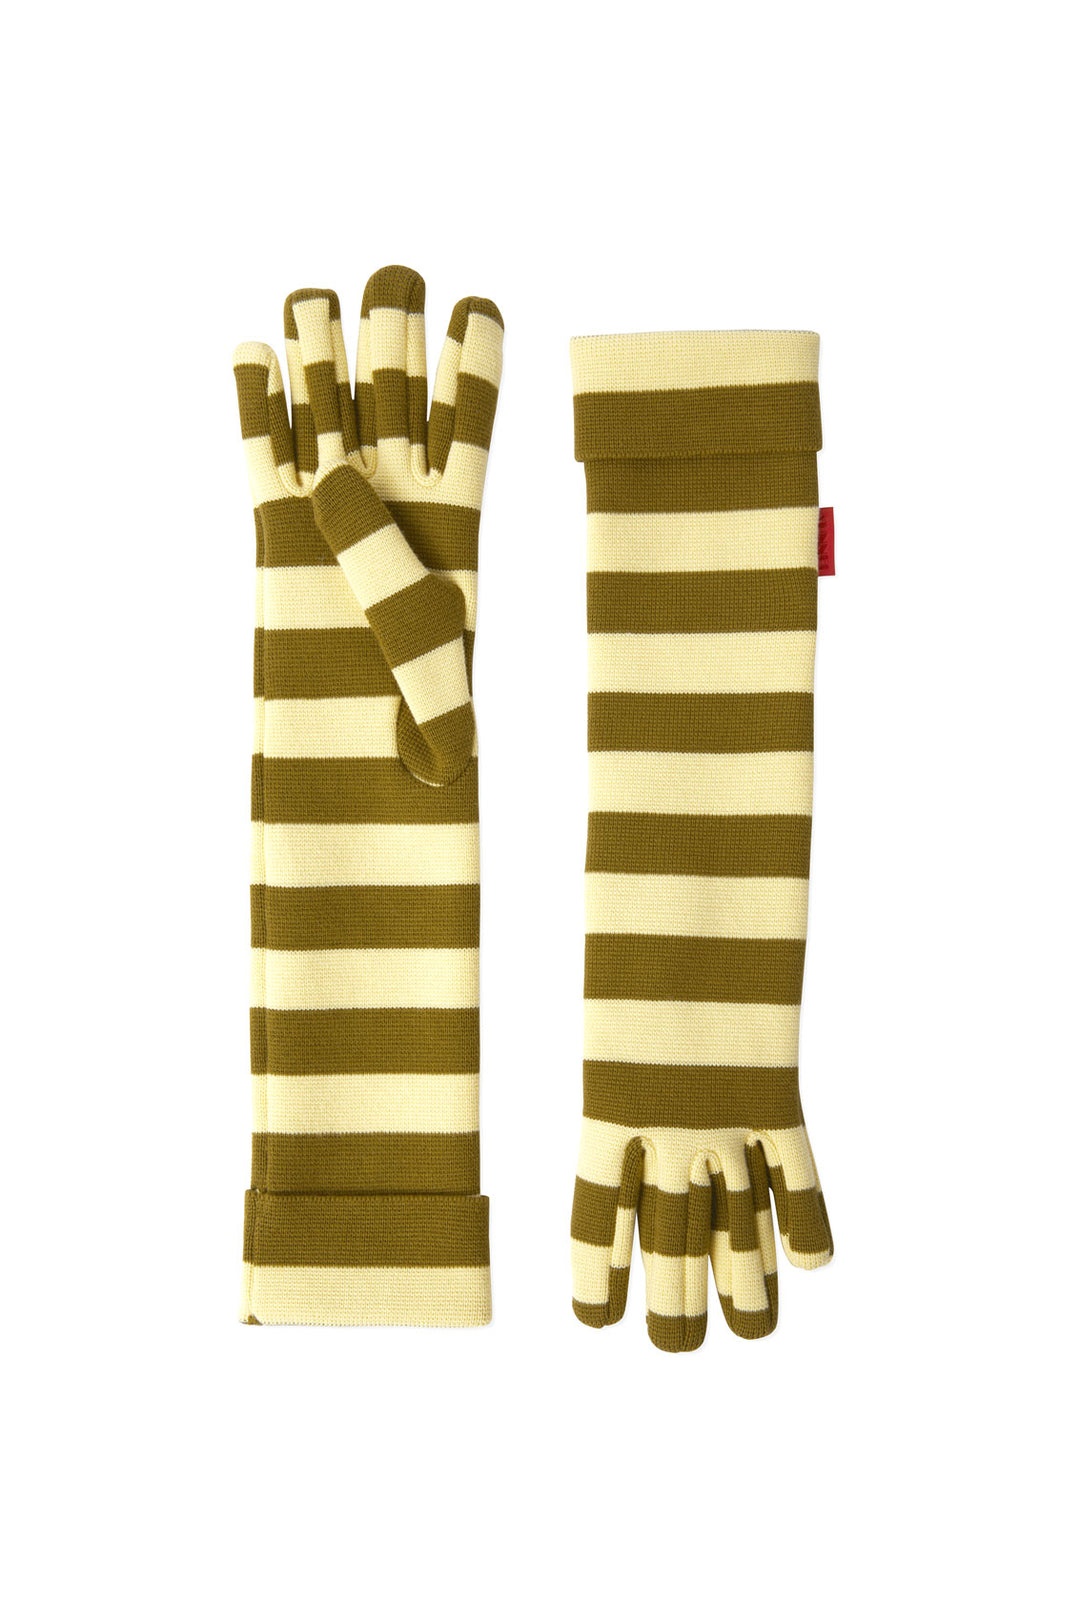 KNIT GLOVES / brown & yellow - 1